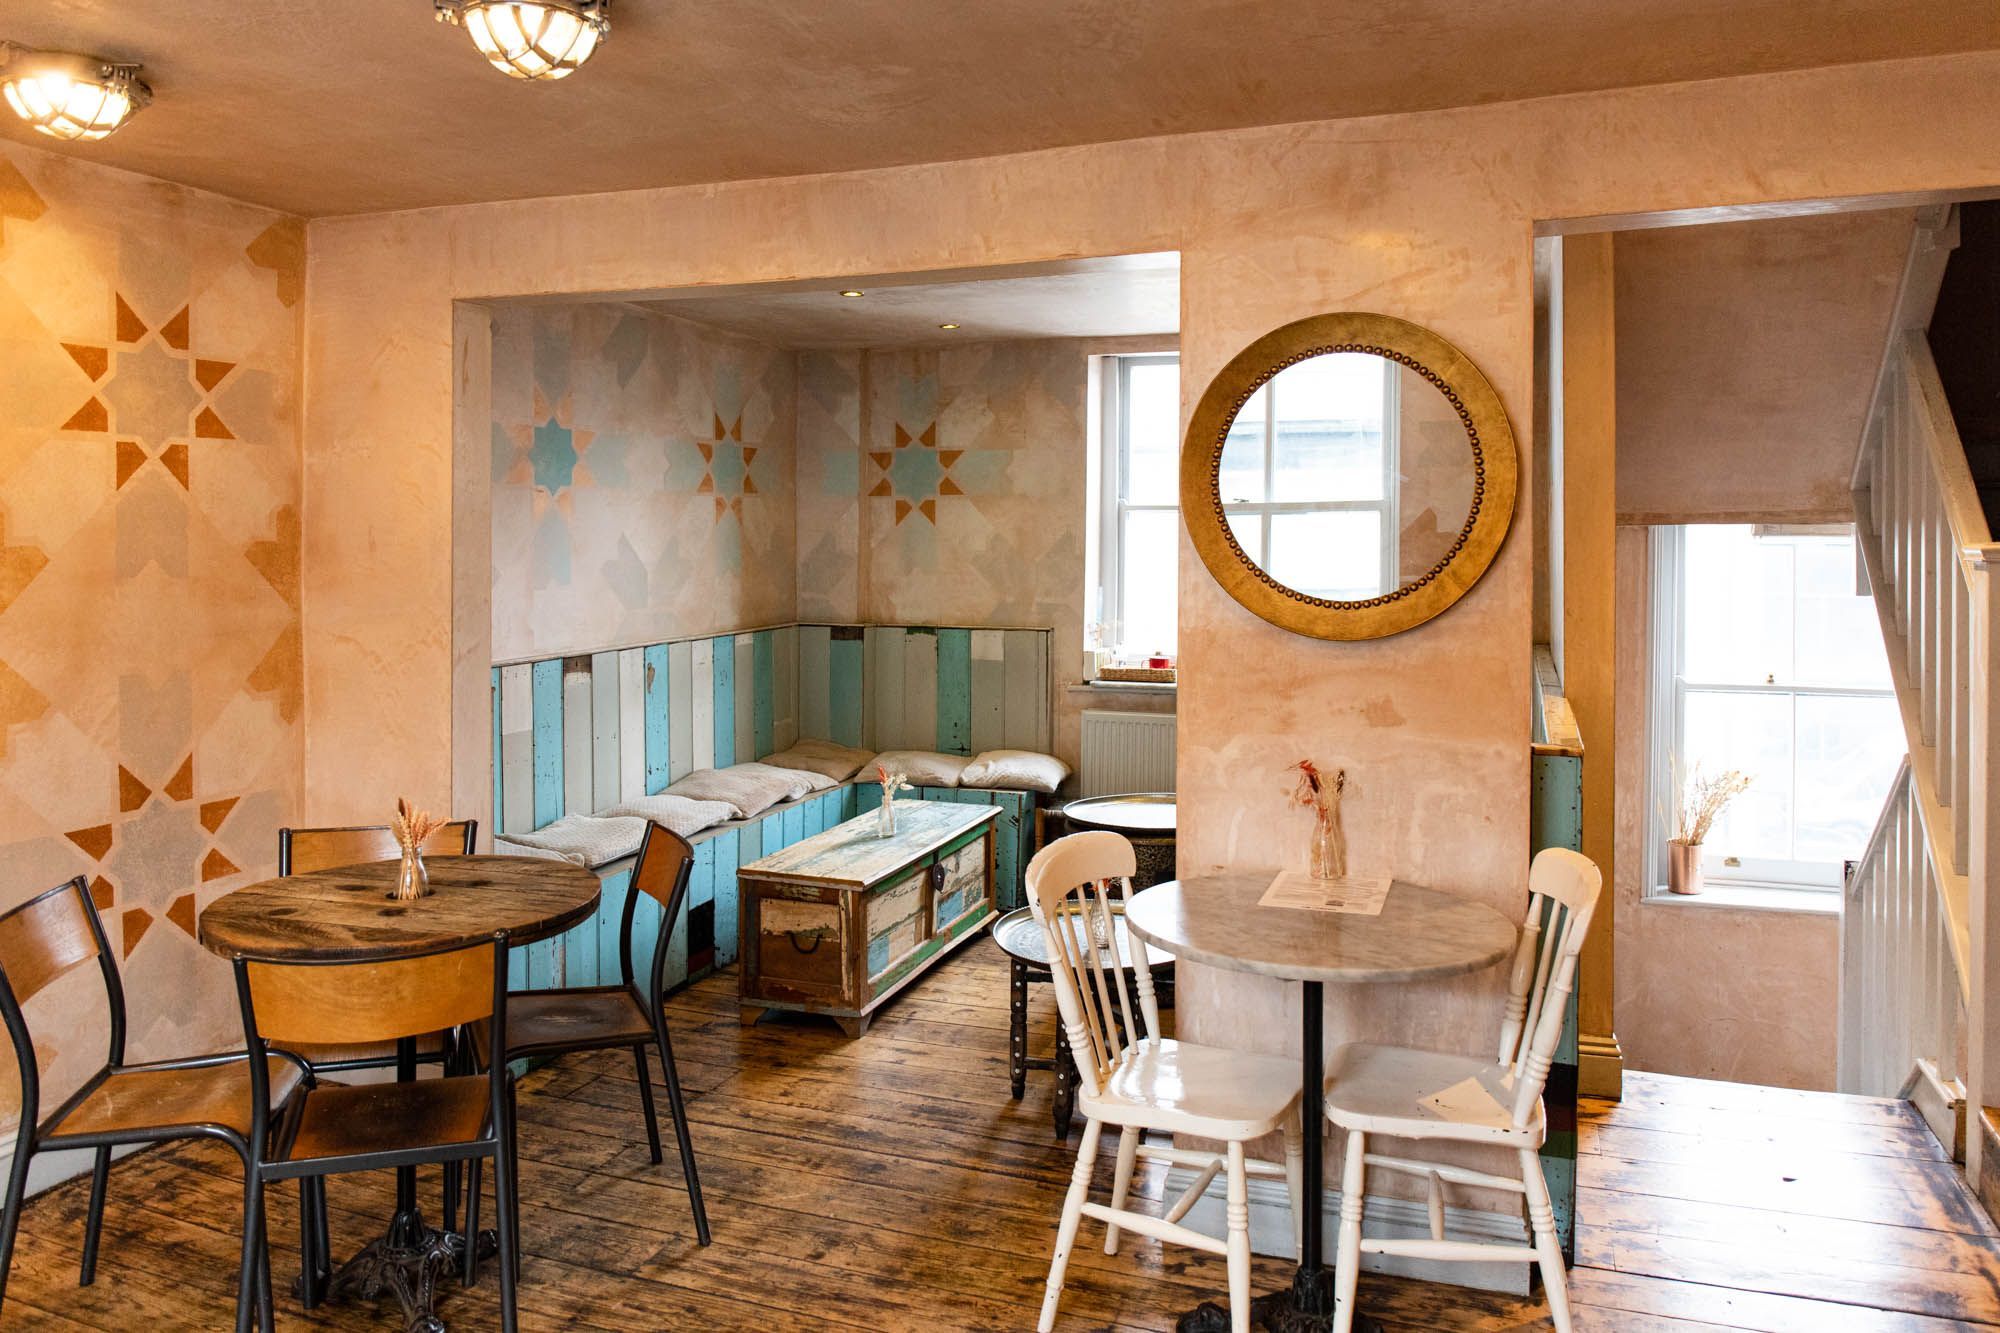 top floor of the Lavash Brighton, two different coloured tables, one is white with white chairs, other one is brown with brown chairs, there is a corner blue and white seating with wooden table. Walls are beige and with some decorations on them